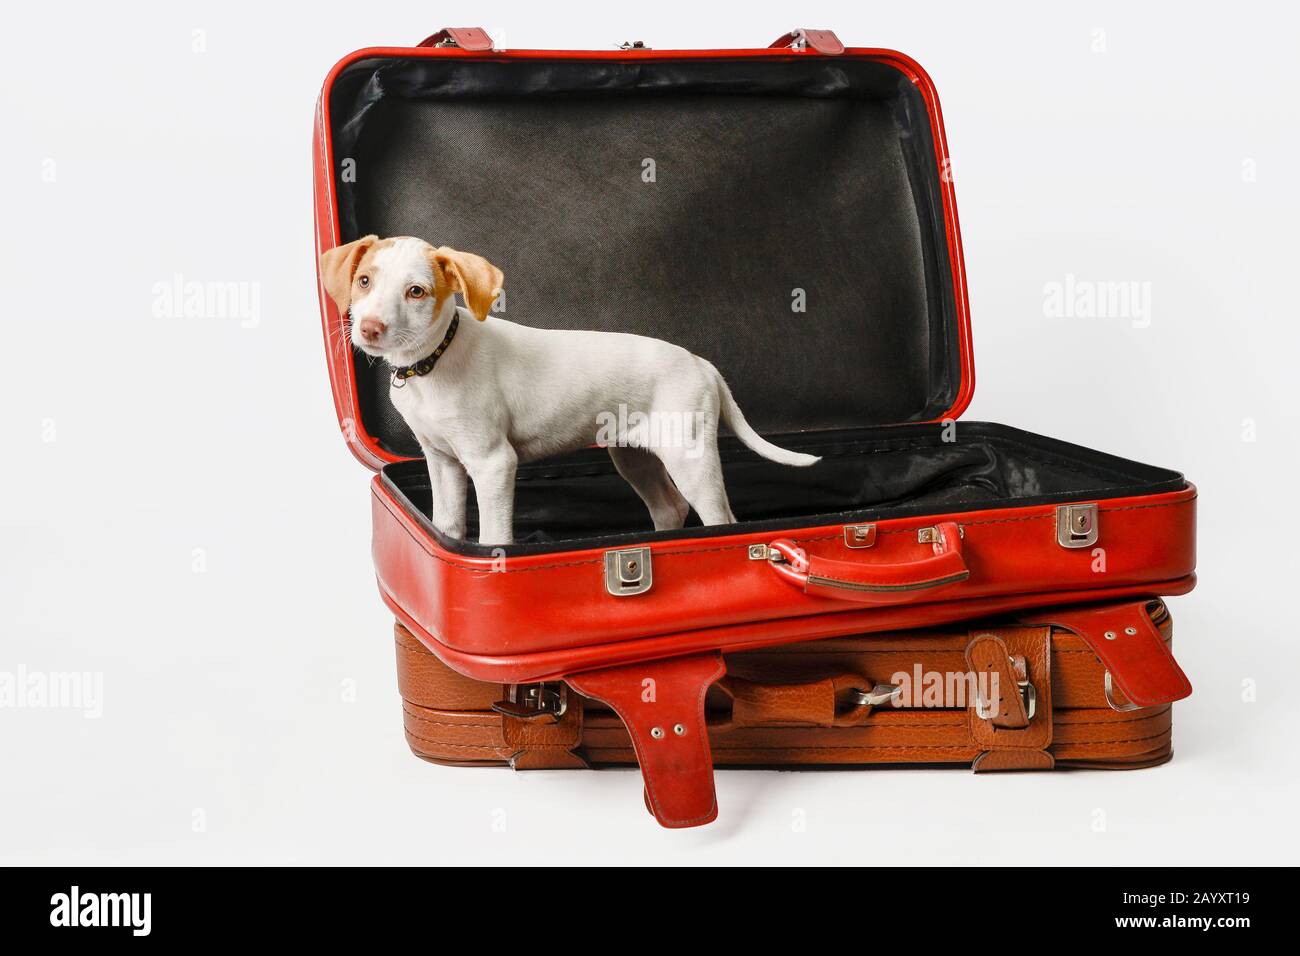 Pet, puppy dog in red suitcase Stock Photo